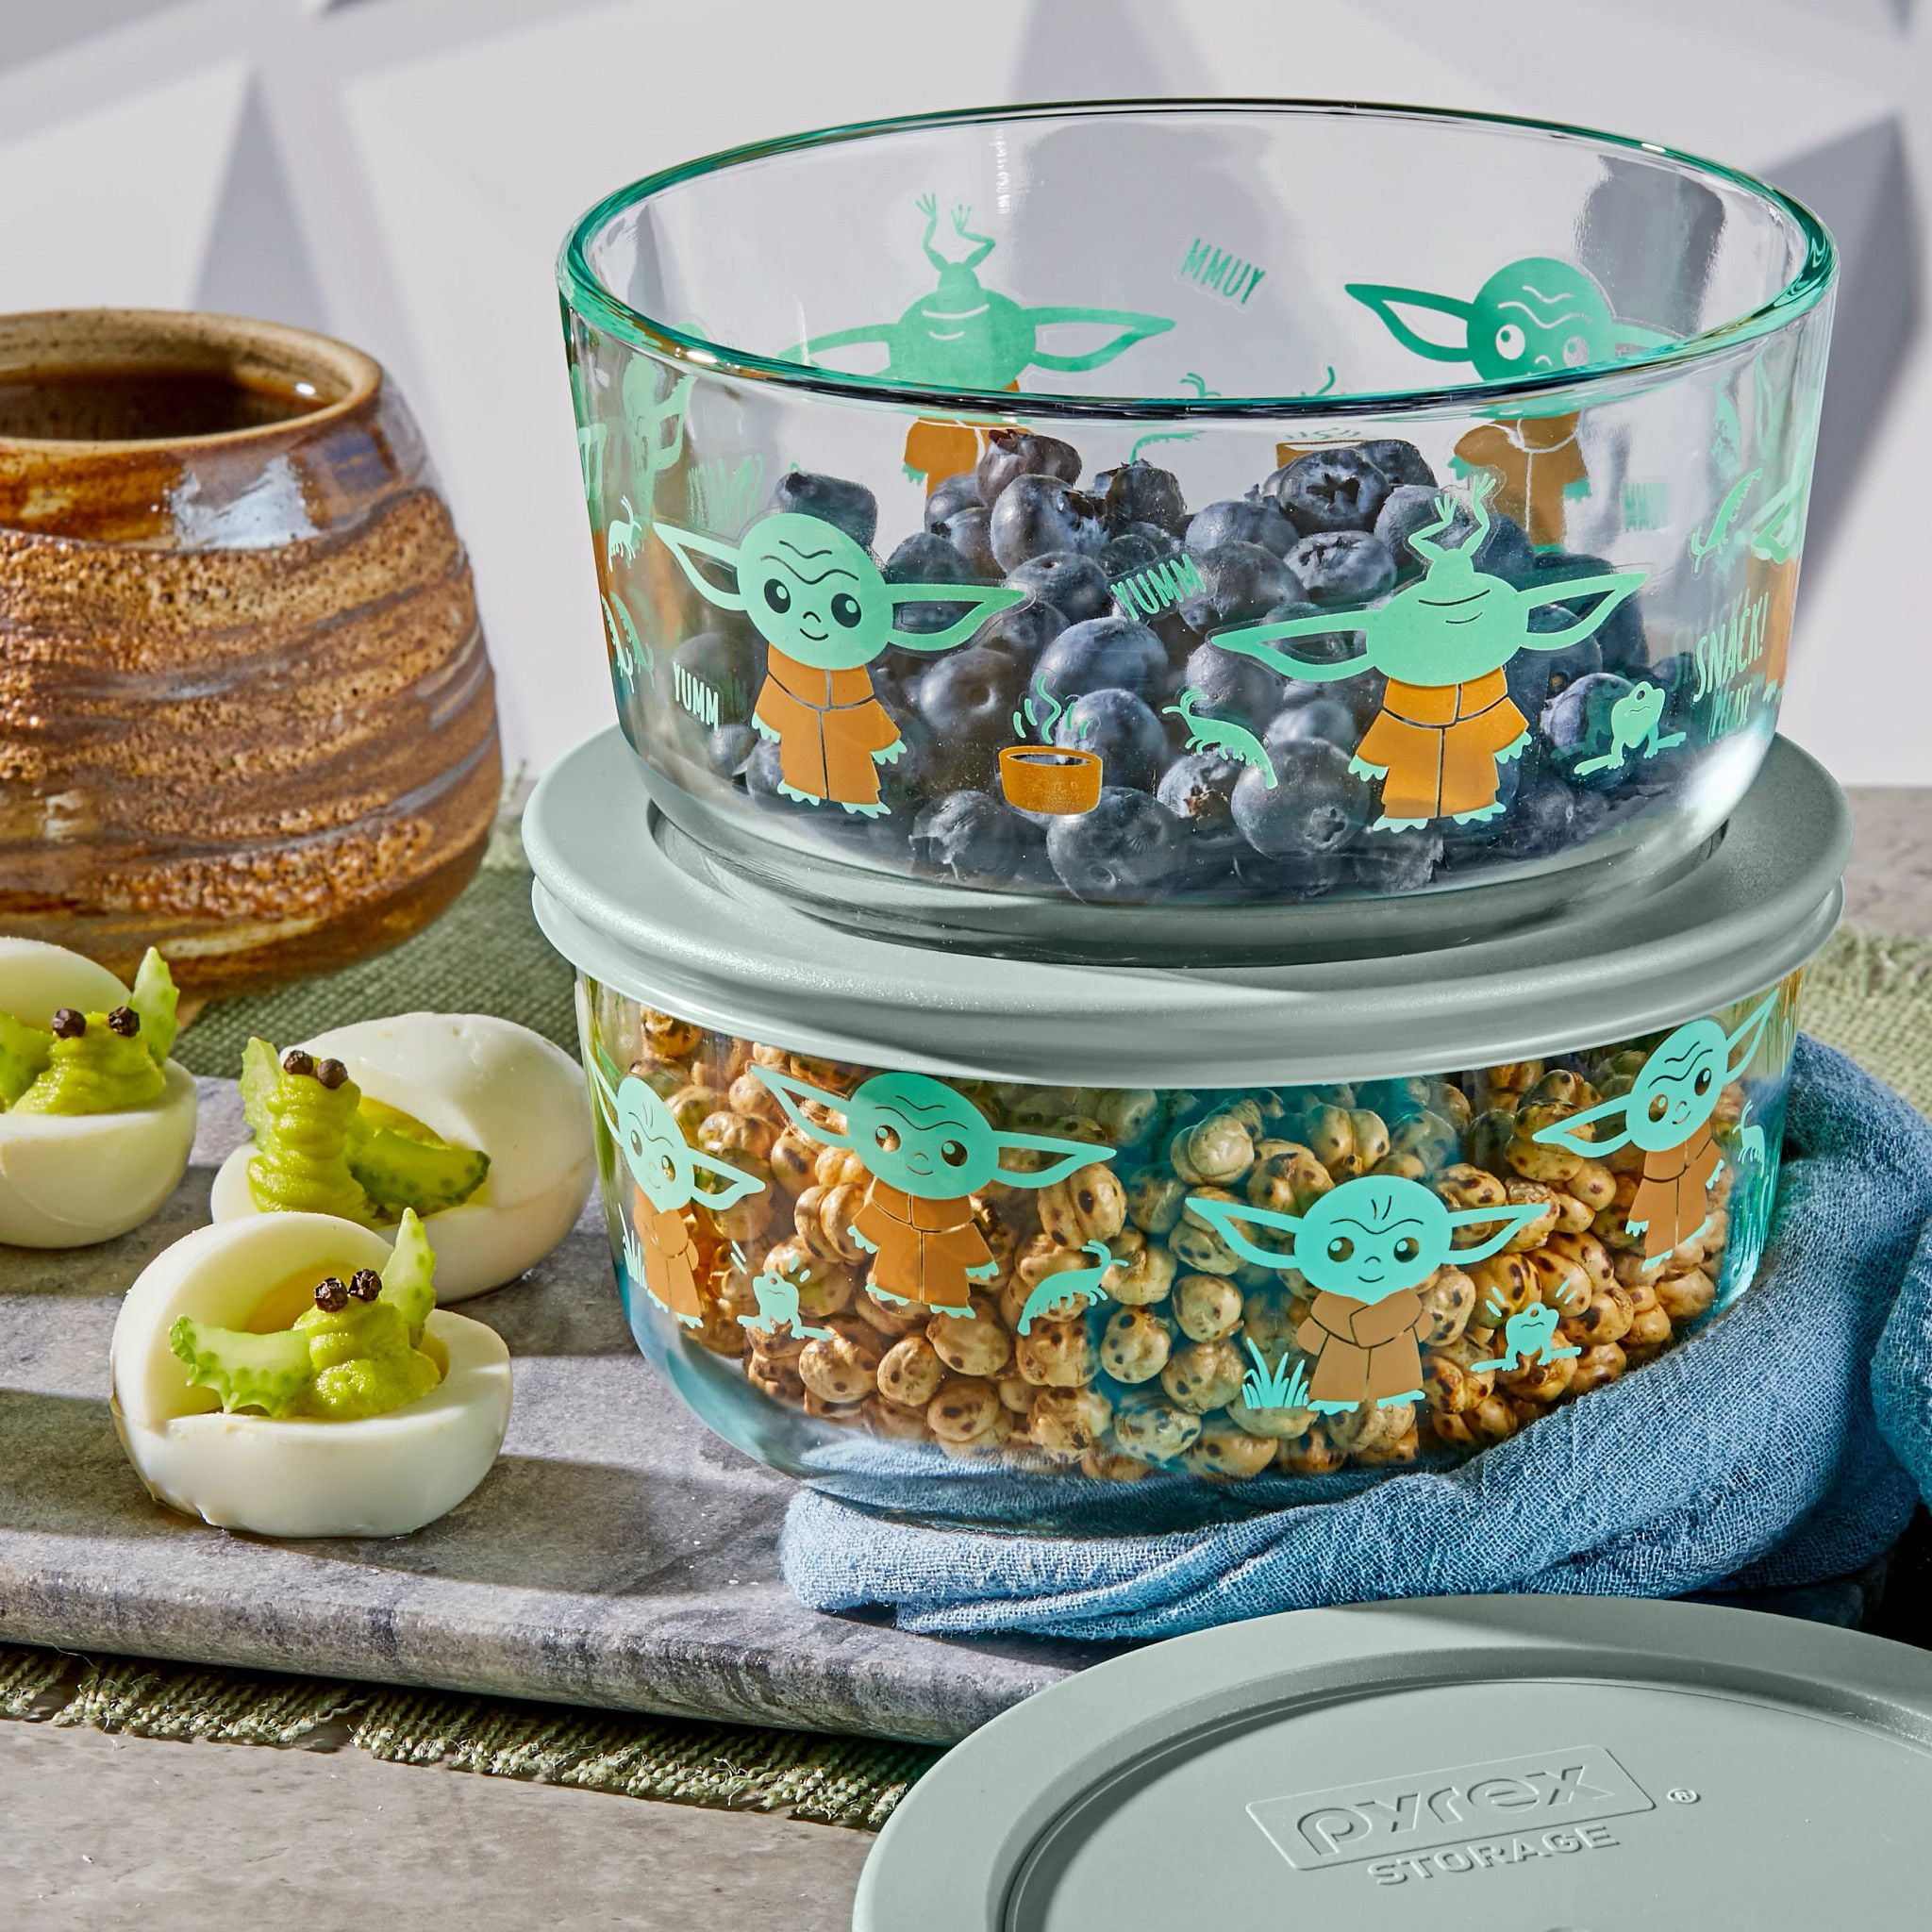 SHOP: New Star Wars Baby Yoda Snack Containers by Pyrex Now Available  Online - WDW News Today